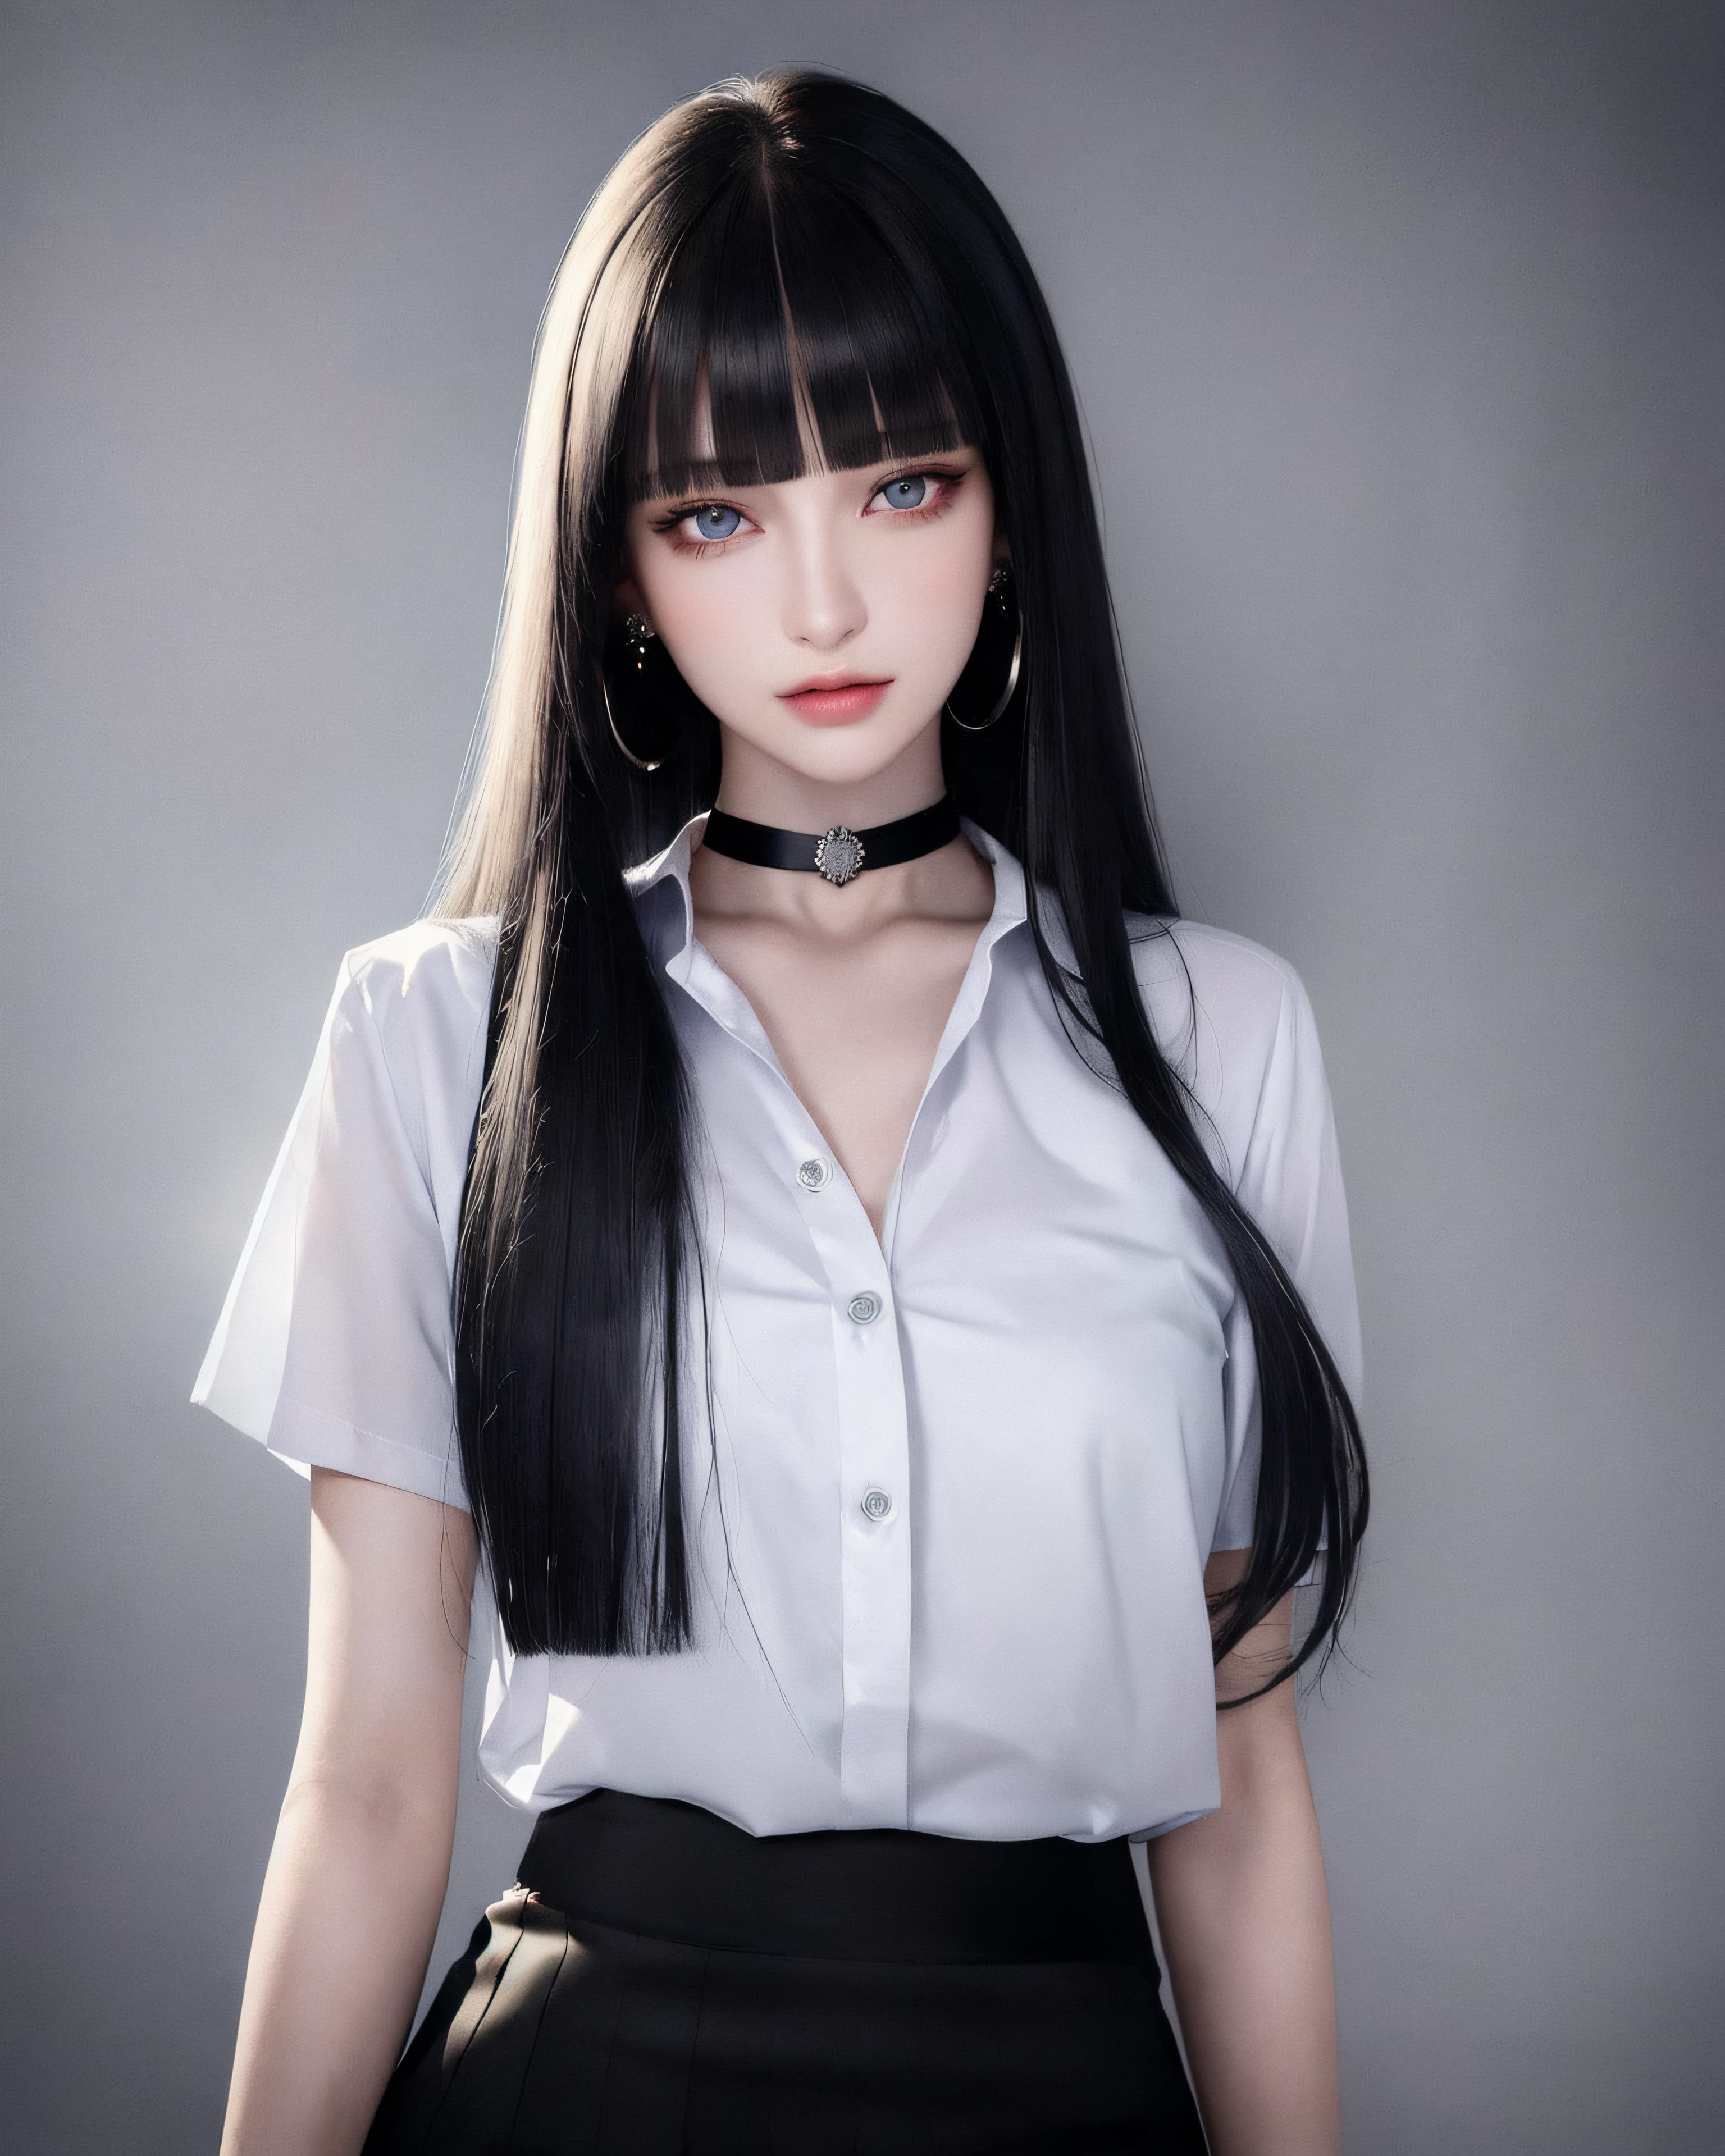 A beautiful young woman wearing a white shirt, black belt, and black hair.